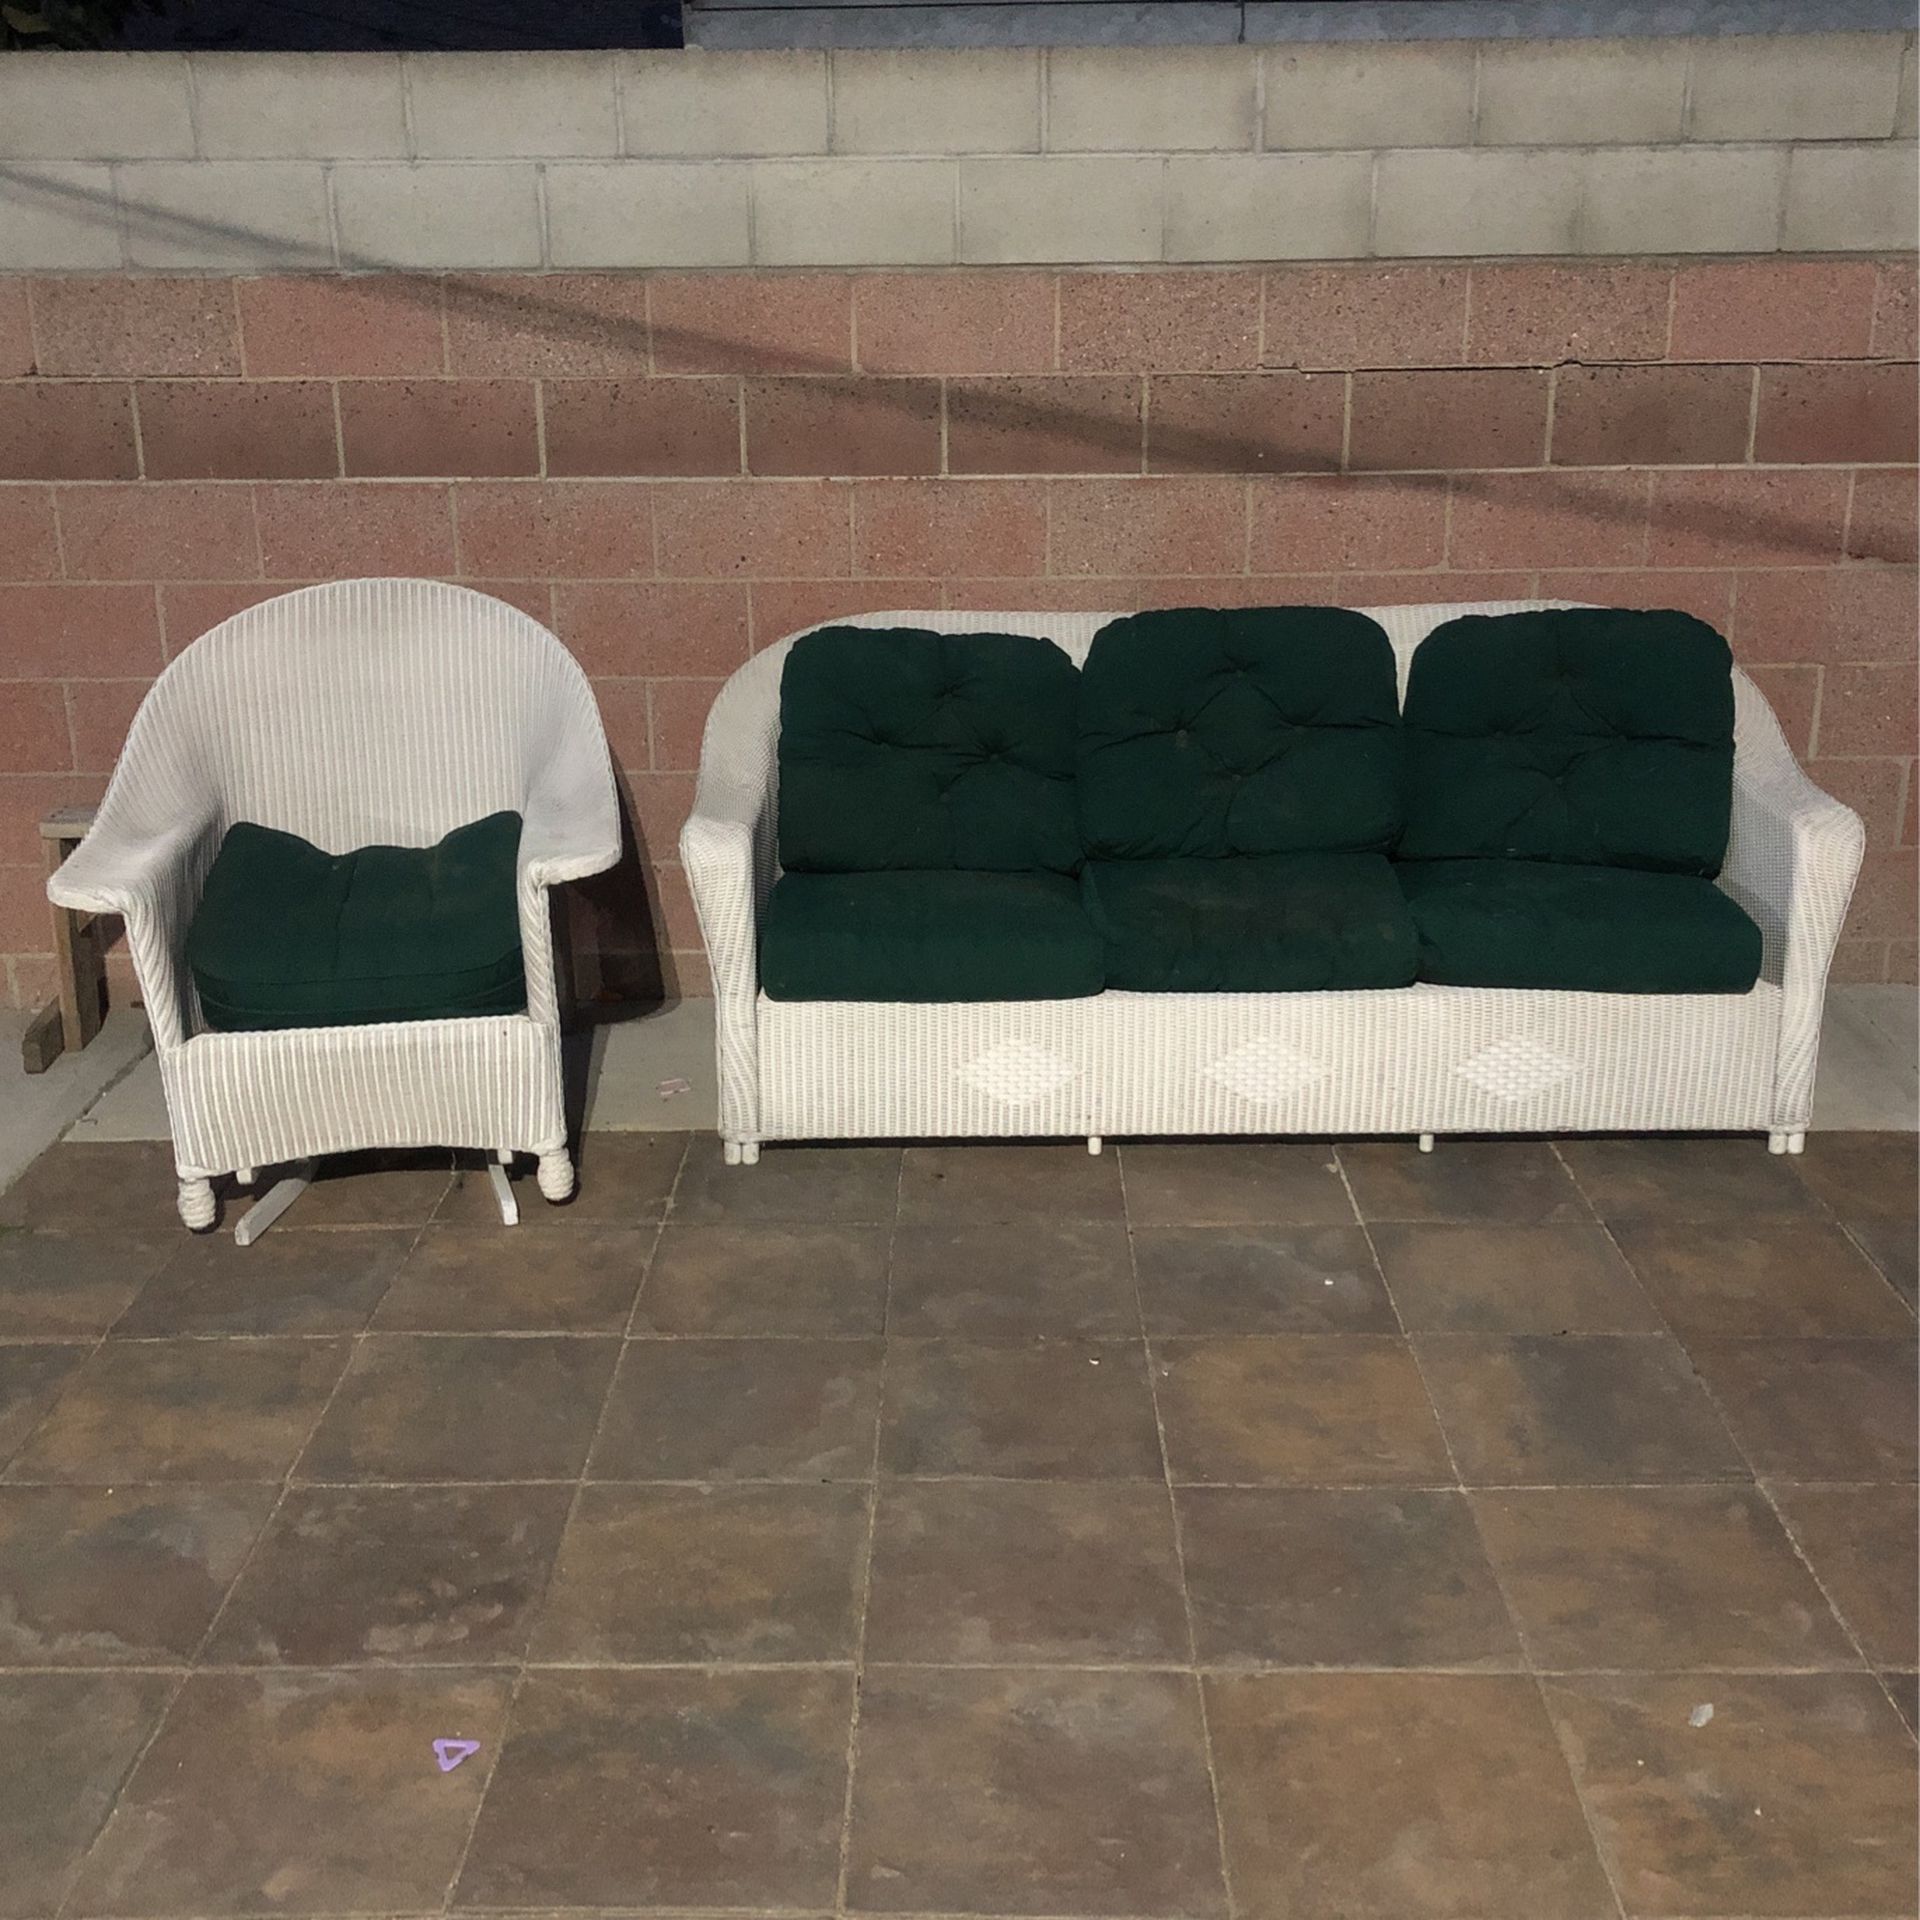 Patio sofa and chair